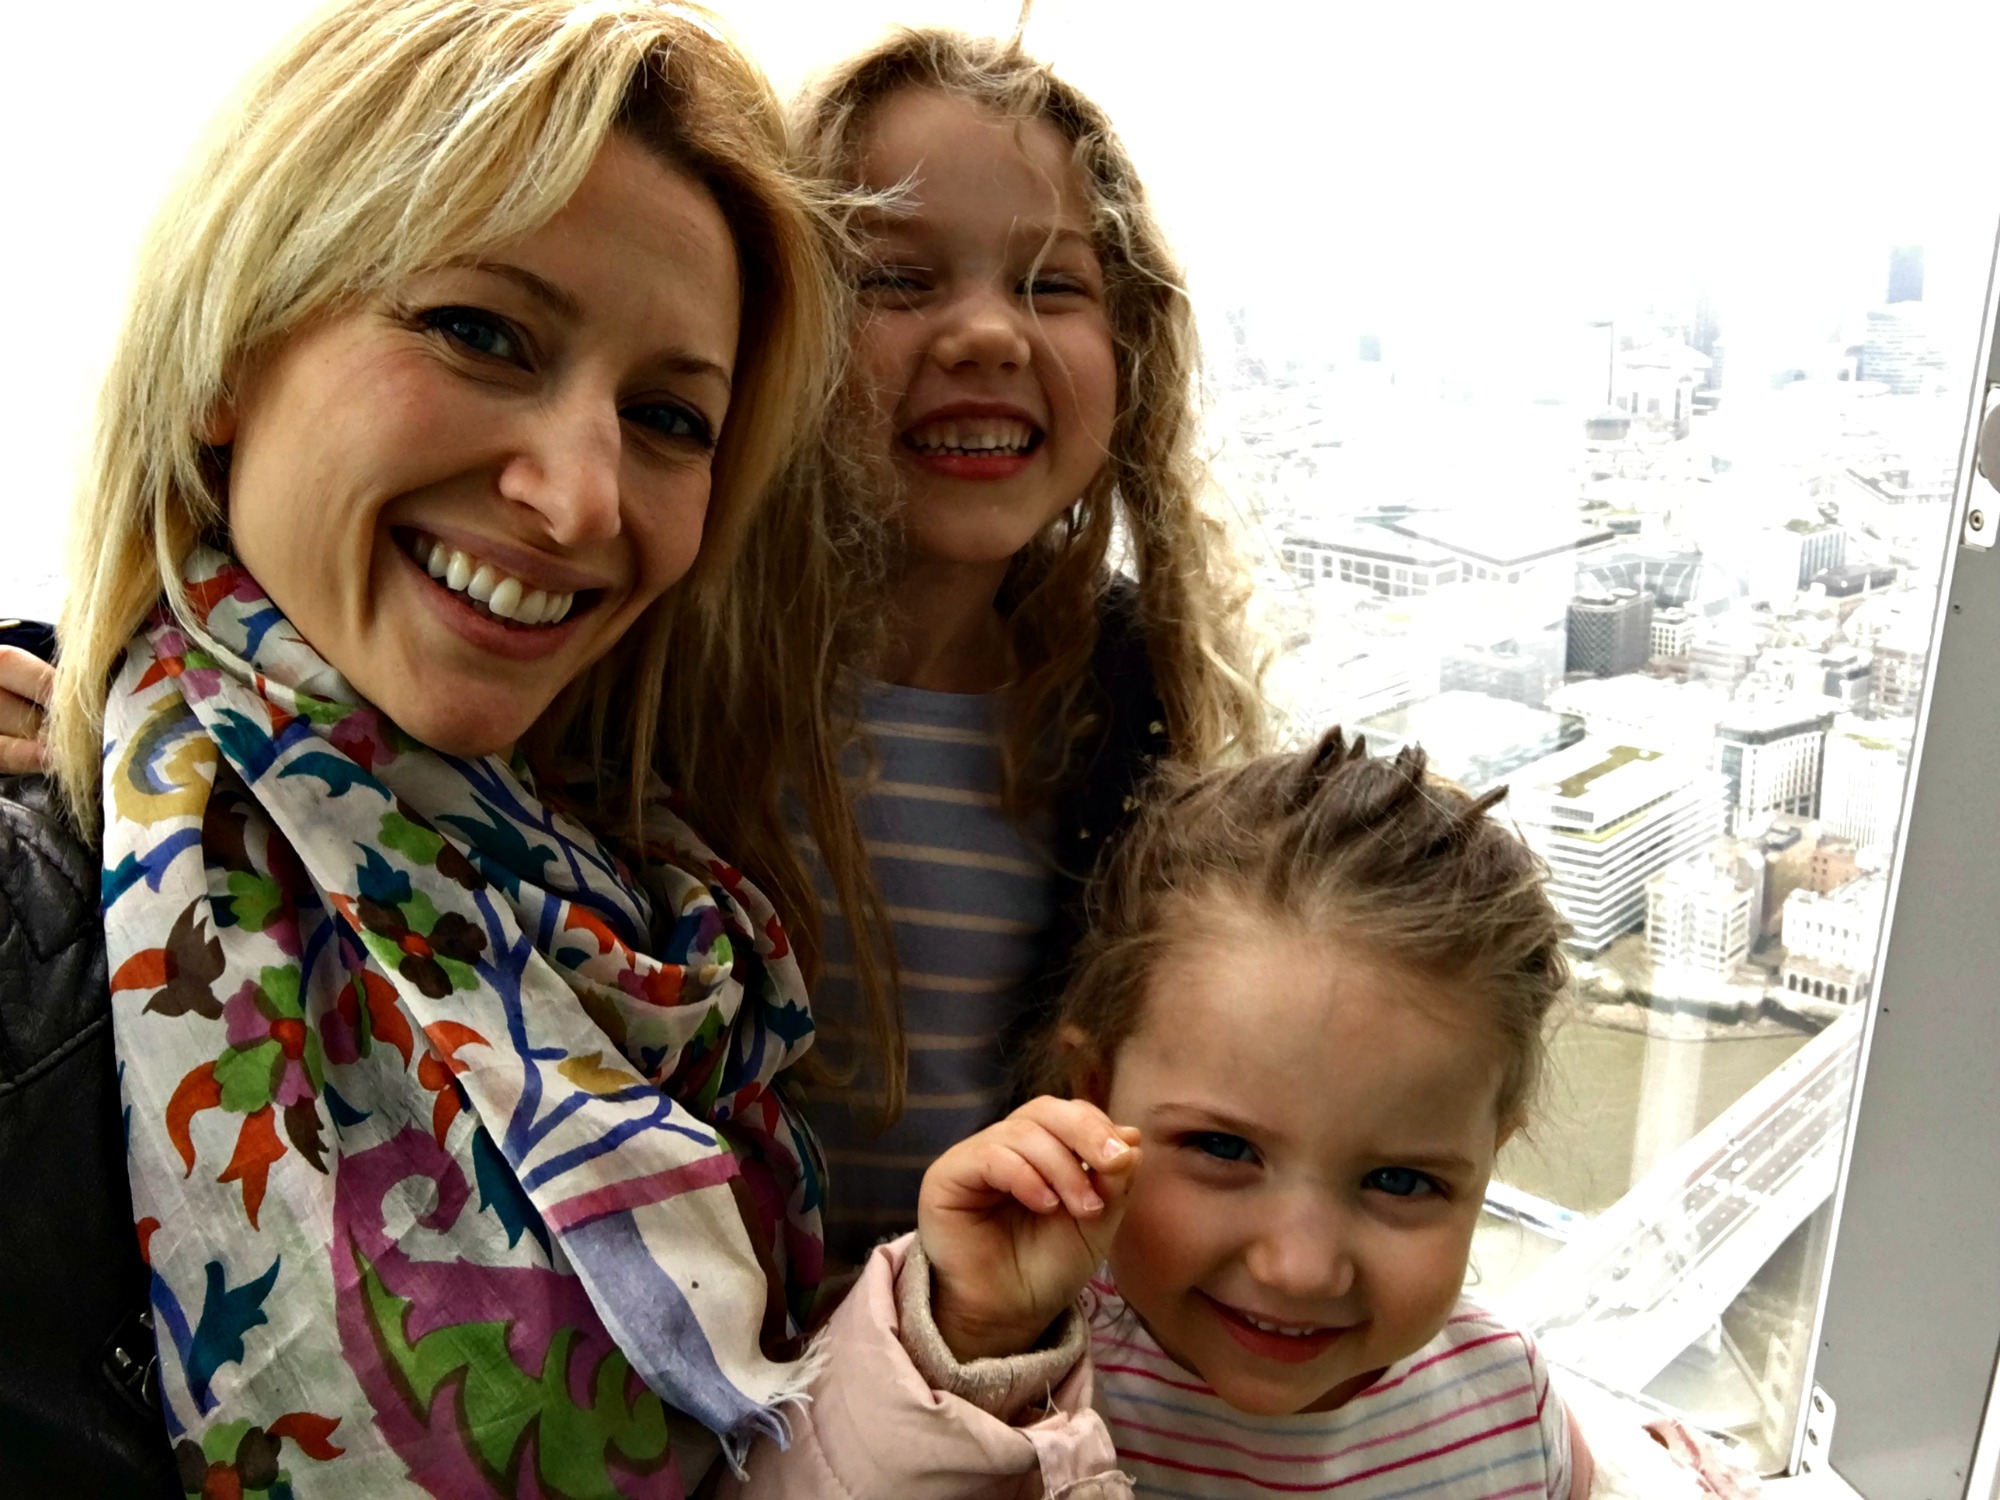 Family day out at highest London Easter egg hunt at The Shard